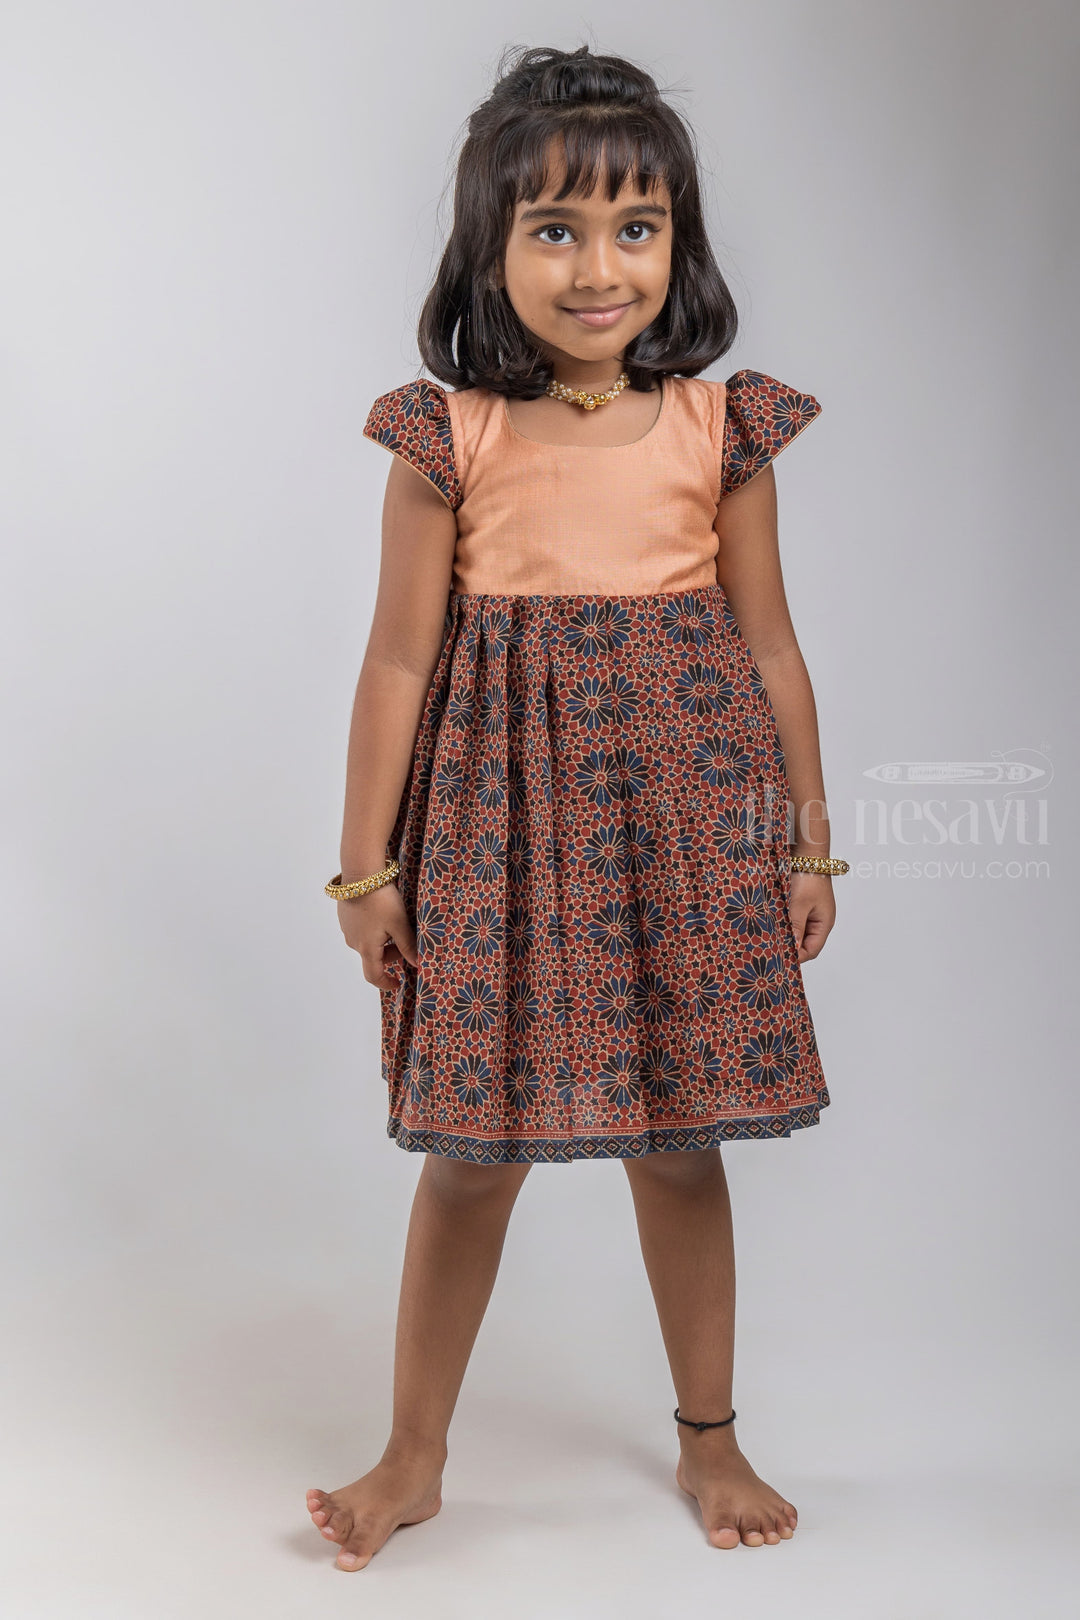 The Nesavu Girls Cotton Frock Soft Cotton Printed Brown Cotton Gown For Baby Girls With Contrasting Yoke With Floral printed Sleeves psr silks Nesavu 12 (3M) / Brown / Cotton GFC857